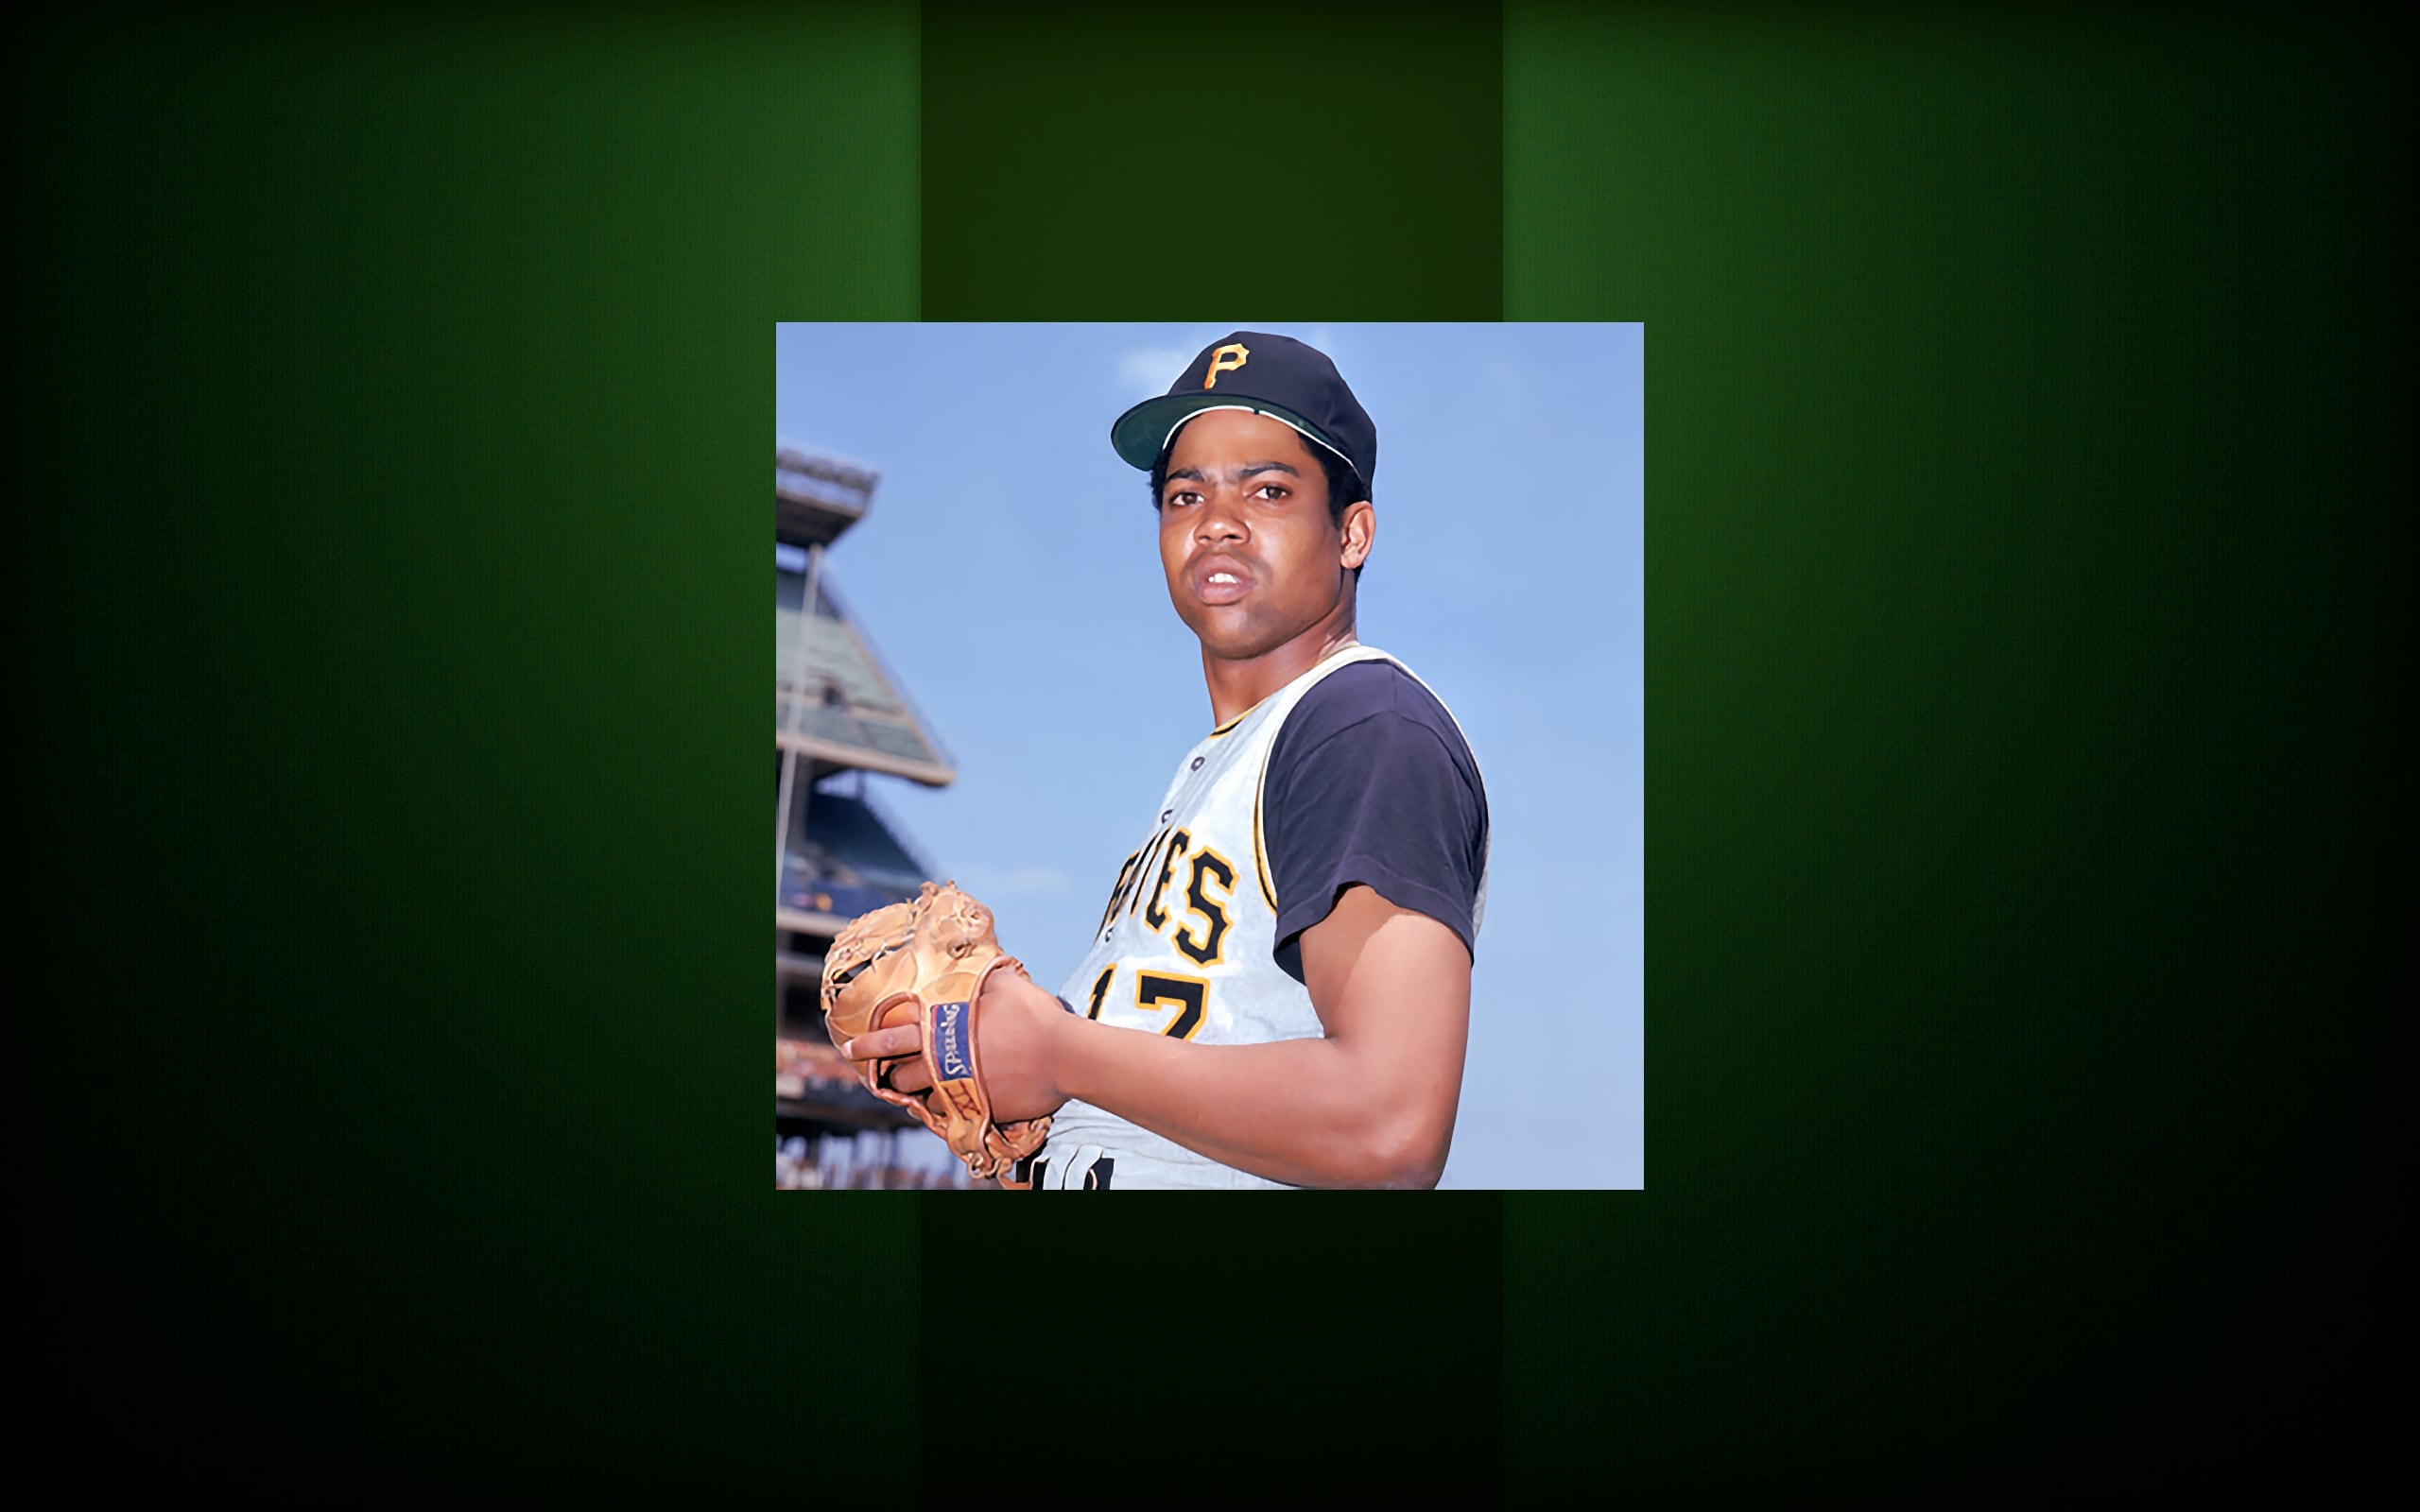 Dock Ellis' legacy is more than his crazy — and now 50-year-old